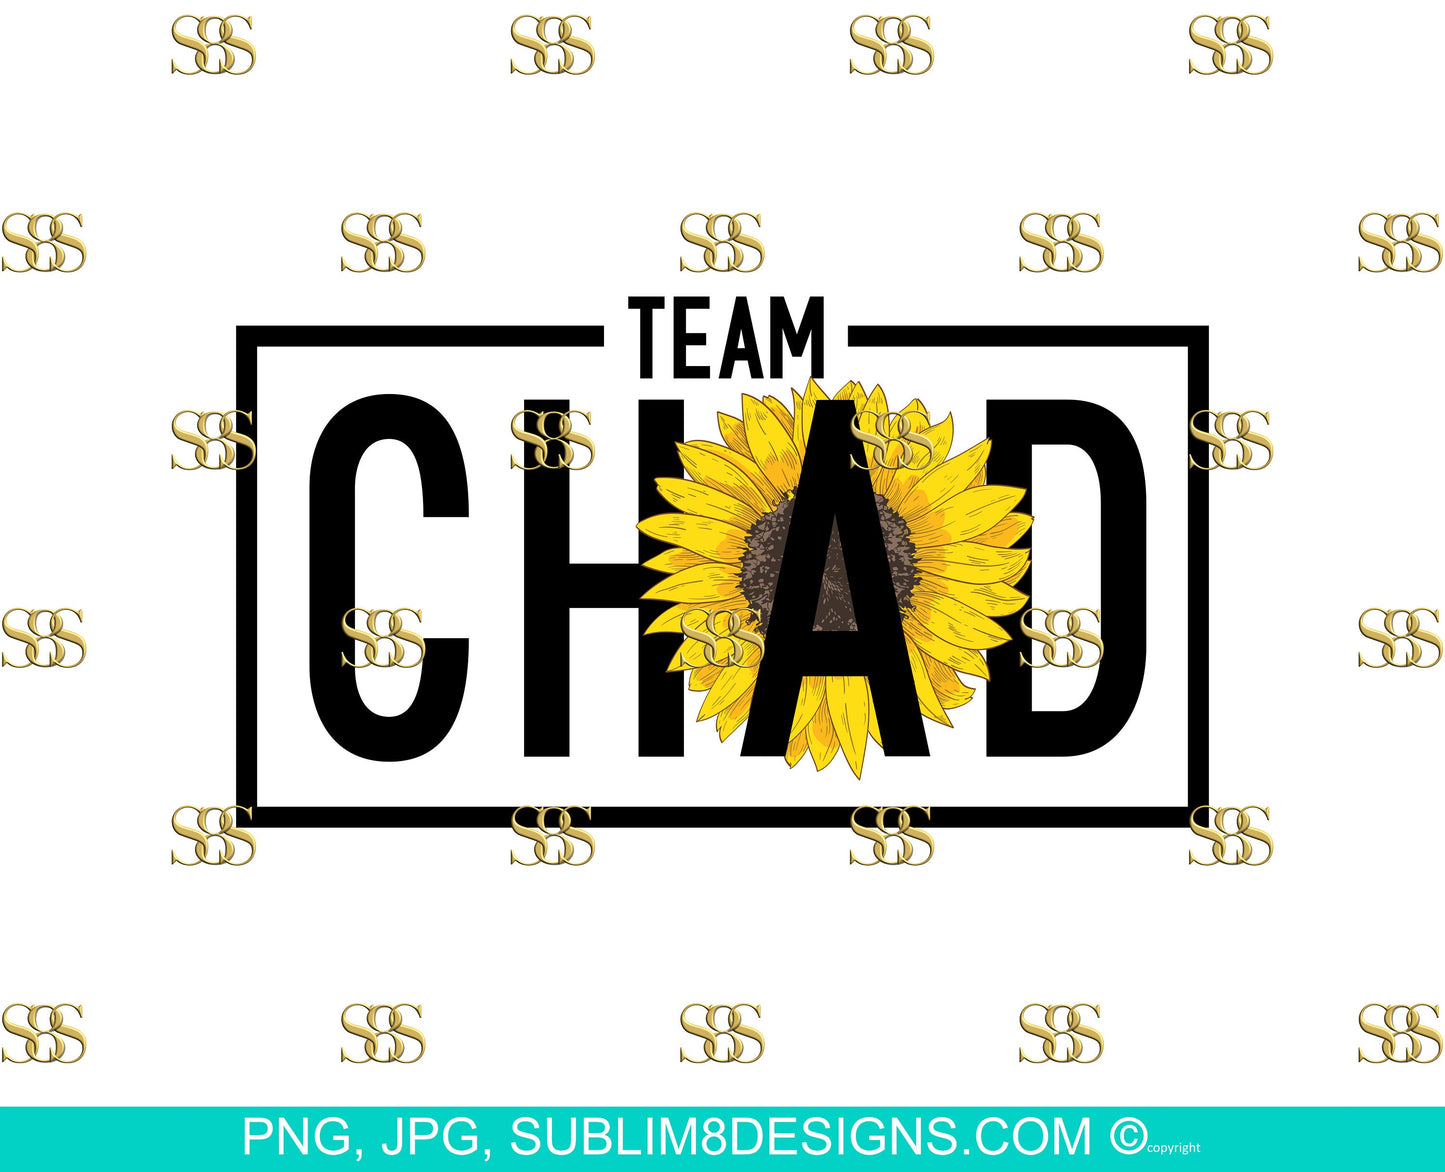 Team Chad PNG and JPG ONLY